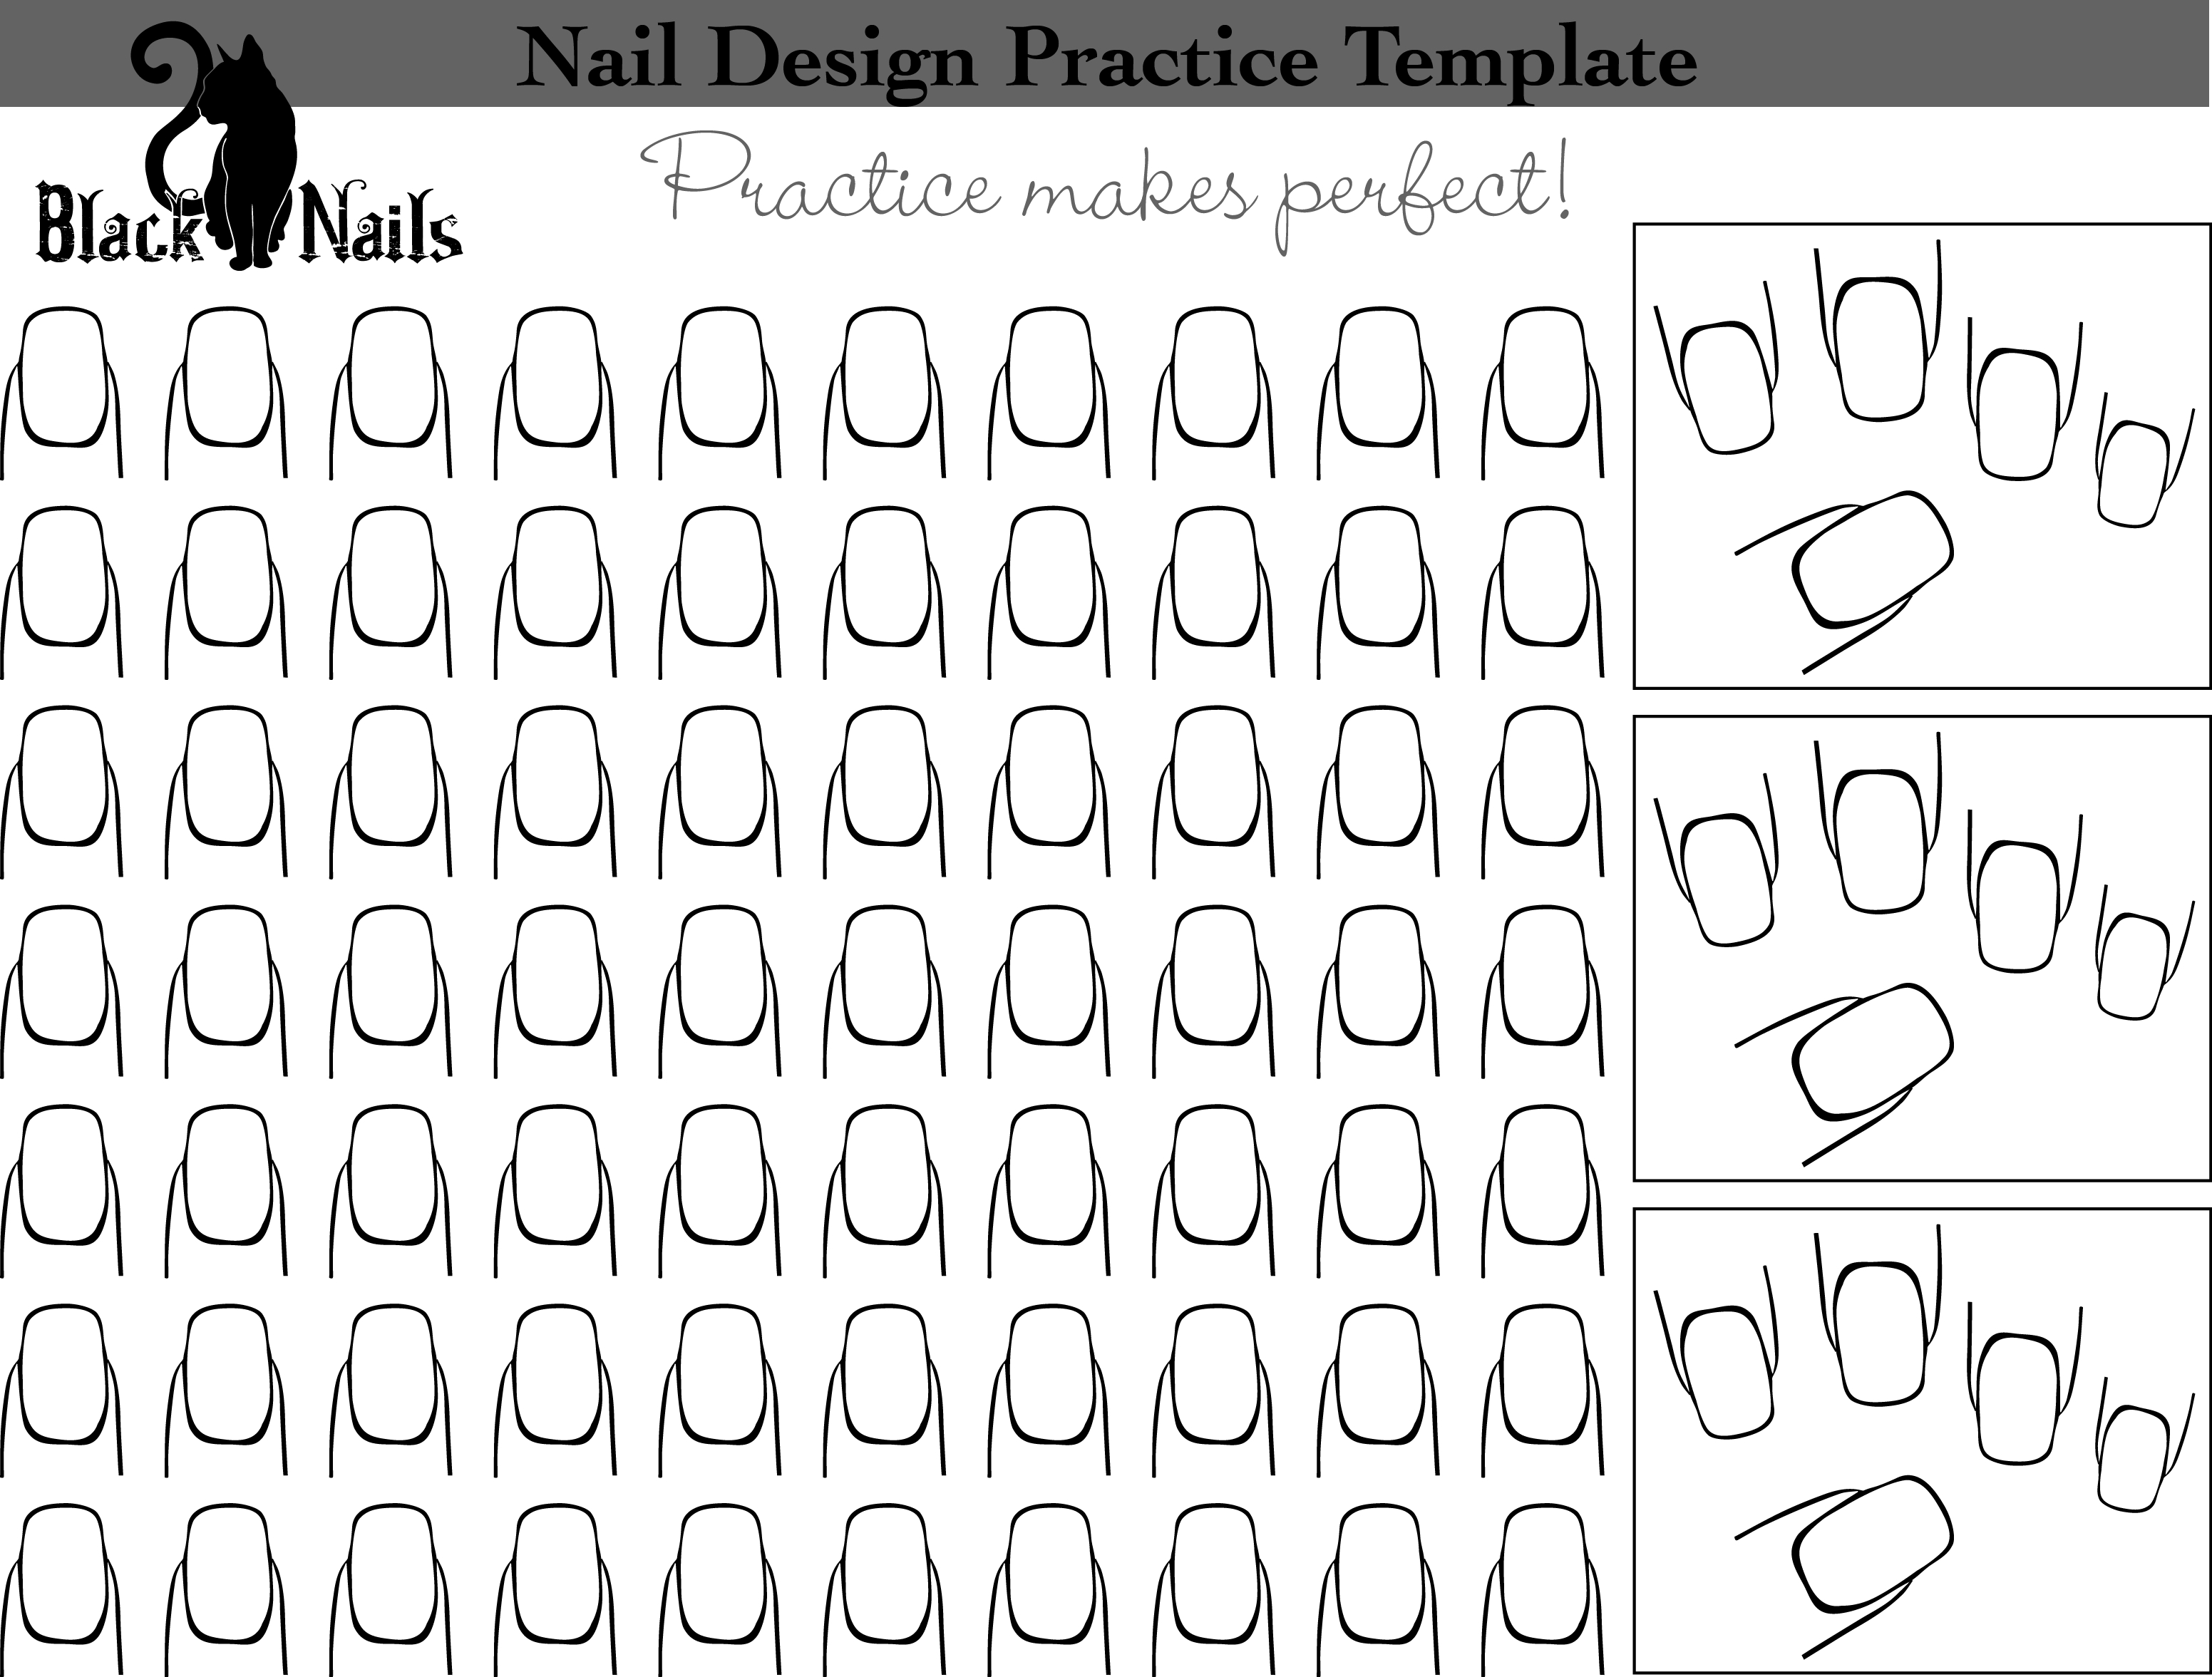 nail-art-design-practice-templates-or-sheets-all-versions-black